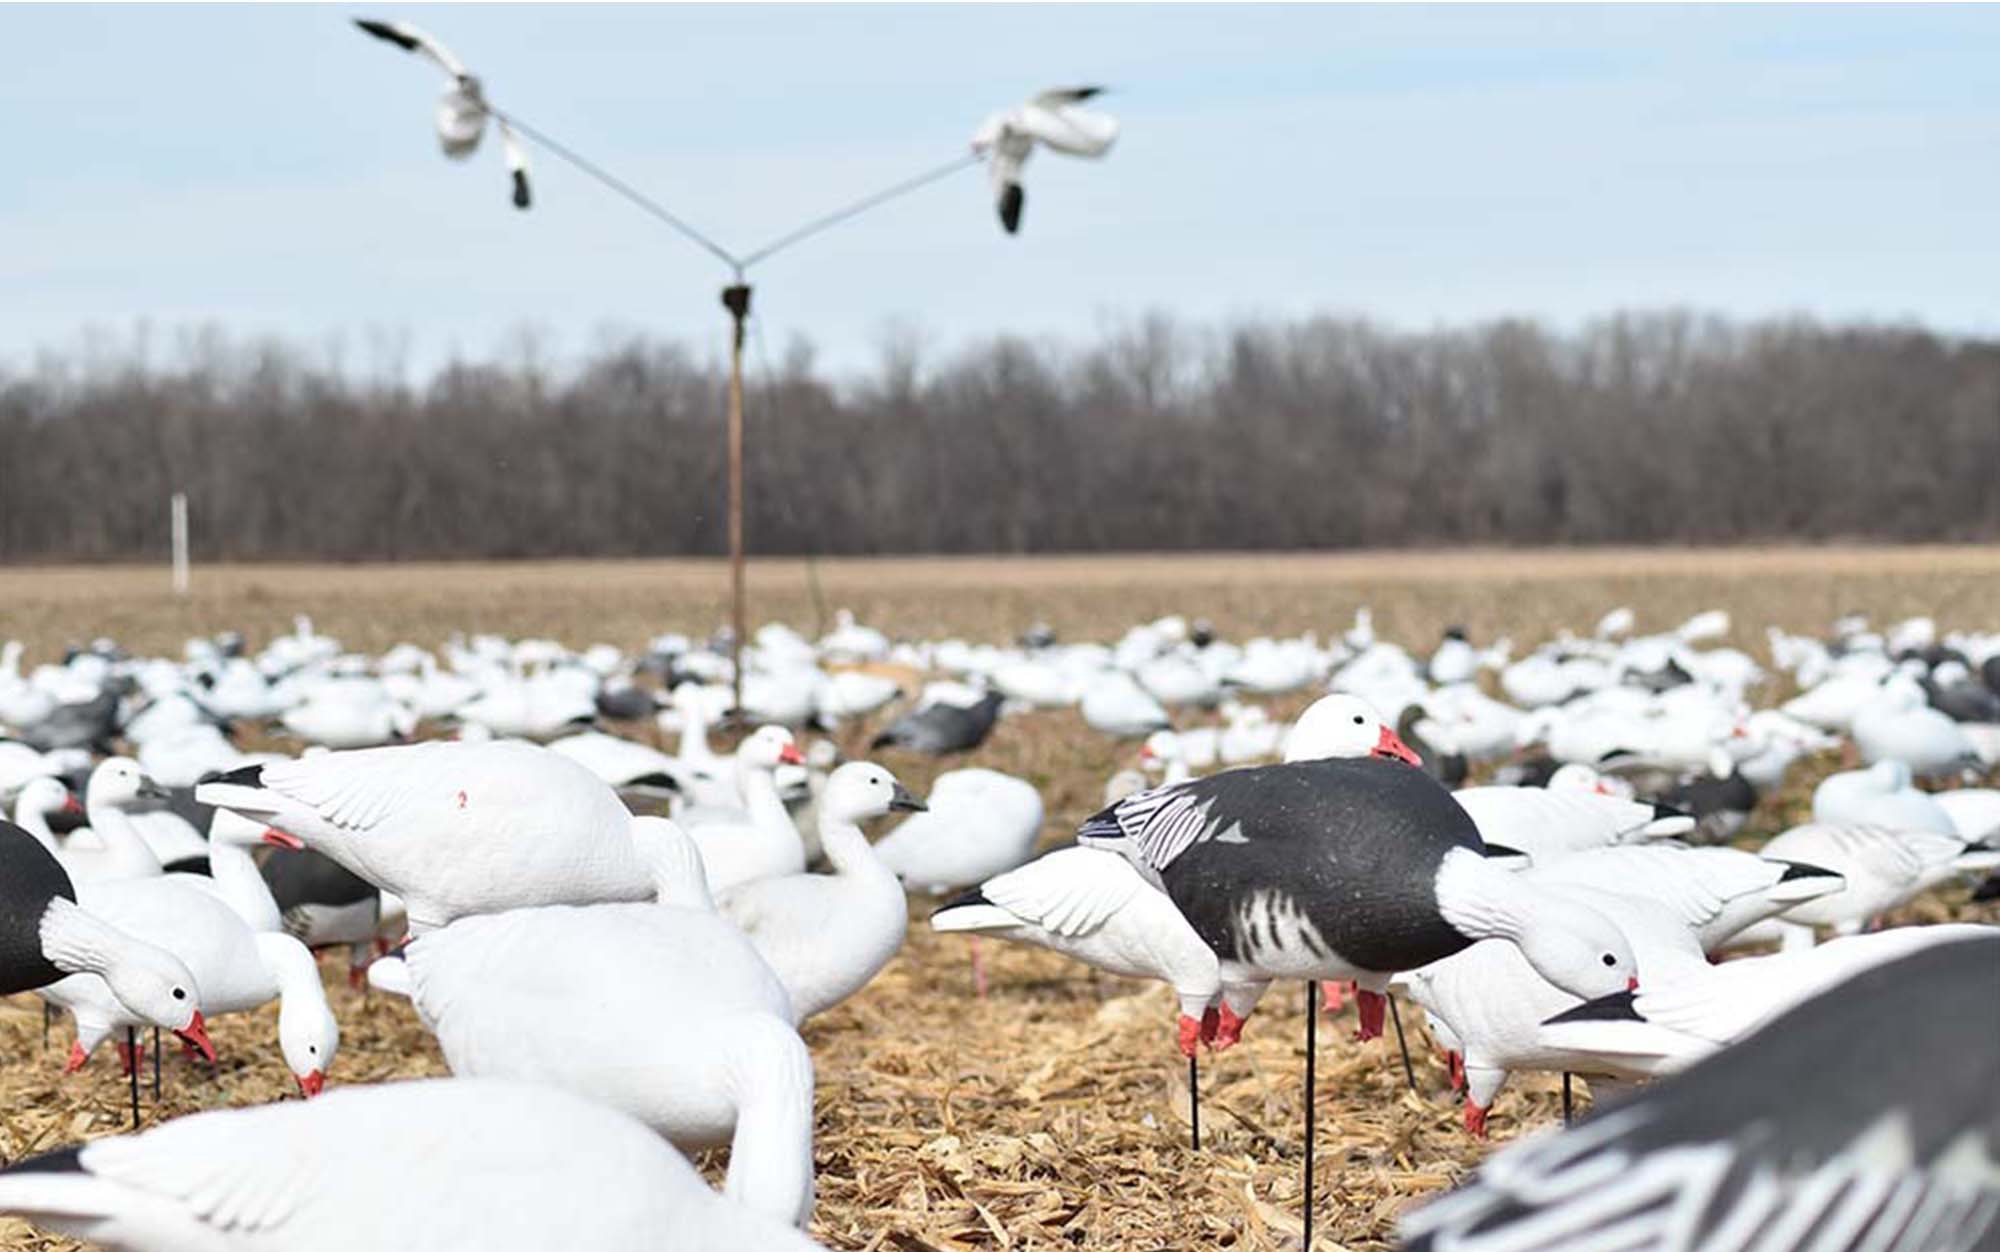 Depending on when and where you're hunting, your spread might need to be 500 or 5,000 decoys. 